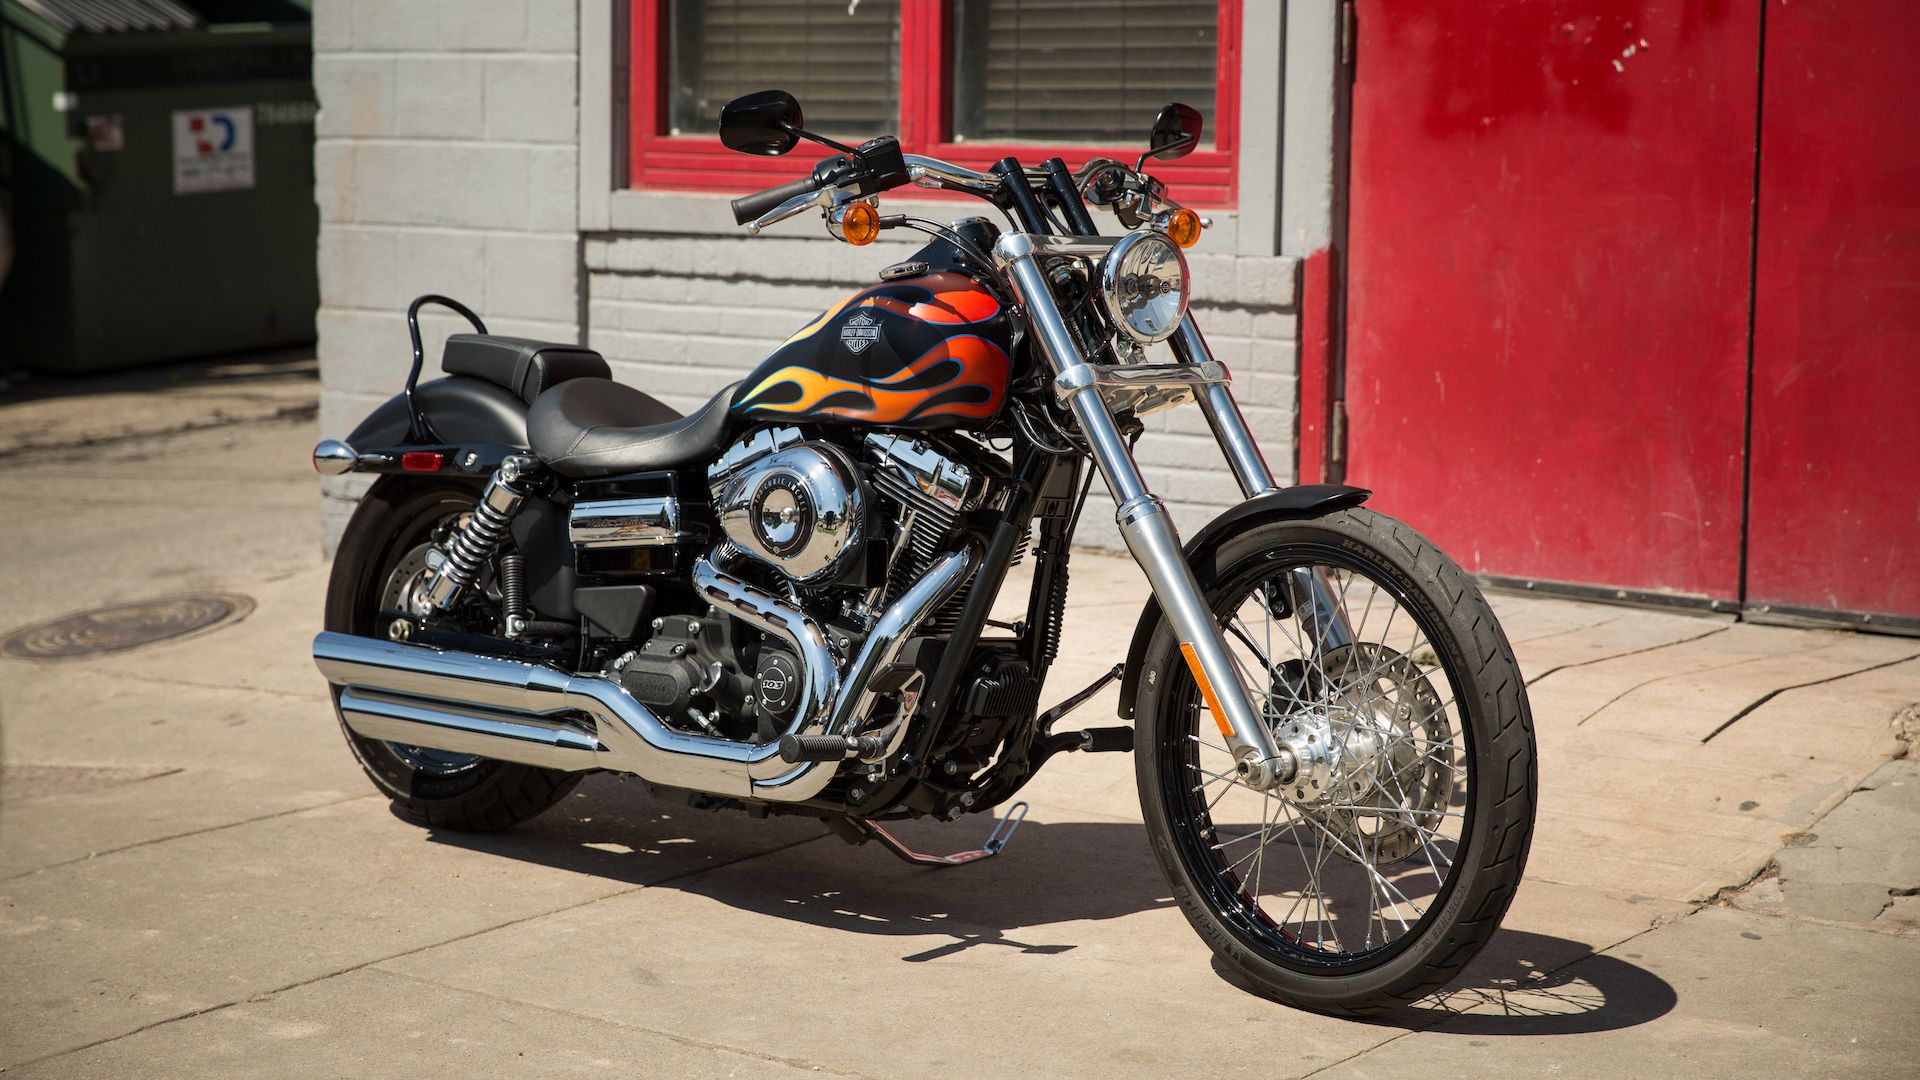 2017 harley davidson dyna wide glide with flame paint job